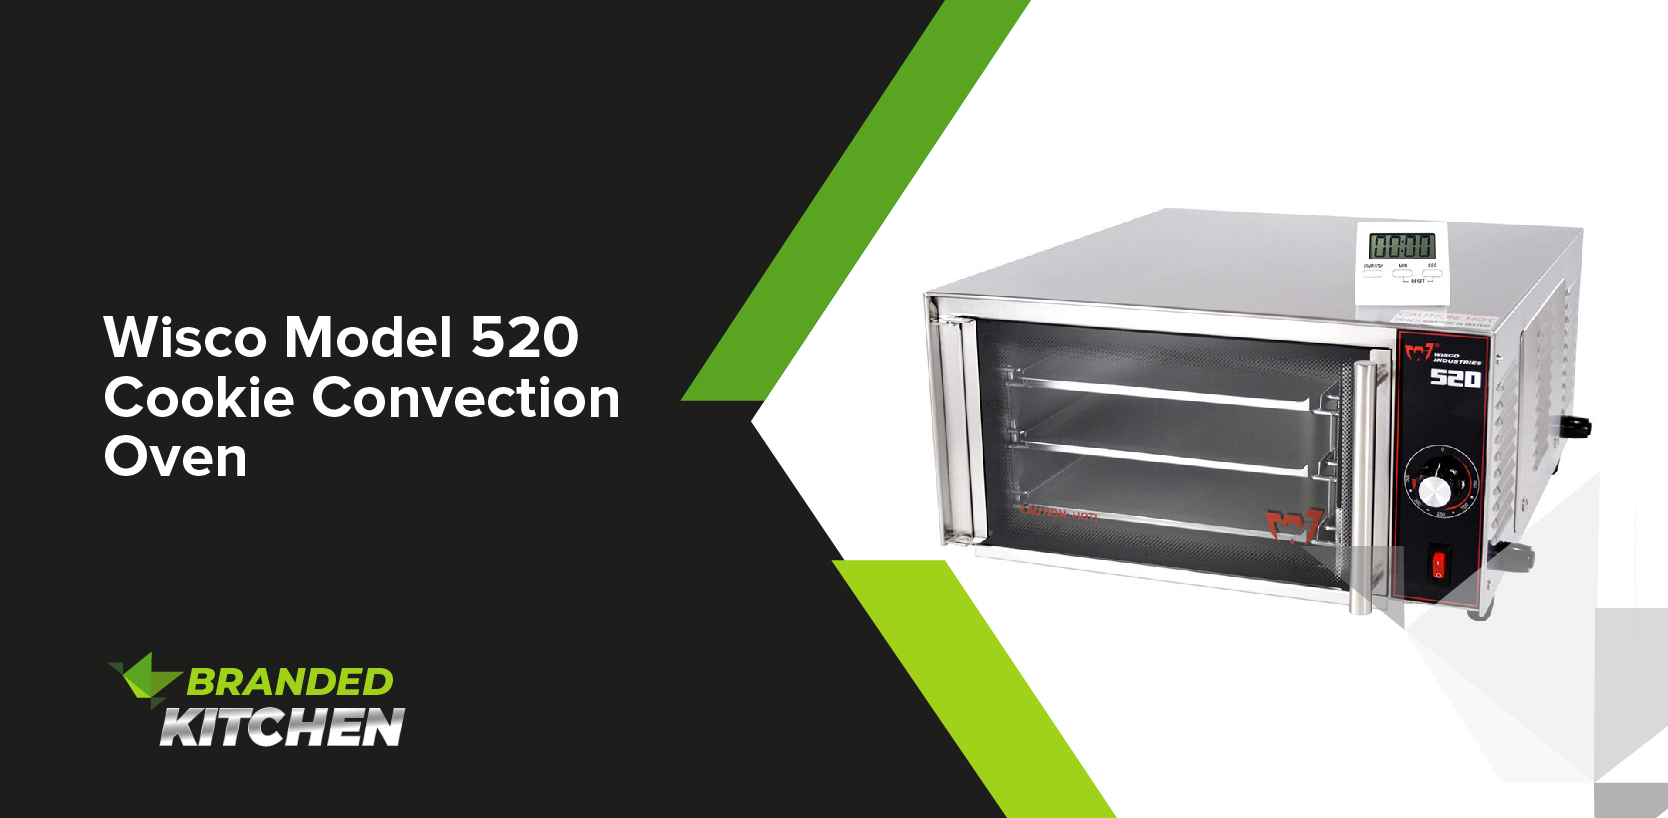 Wisco Model 520 Cookie Convection Oven